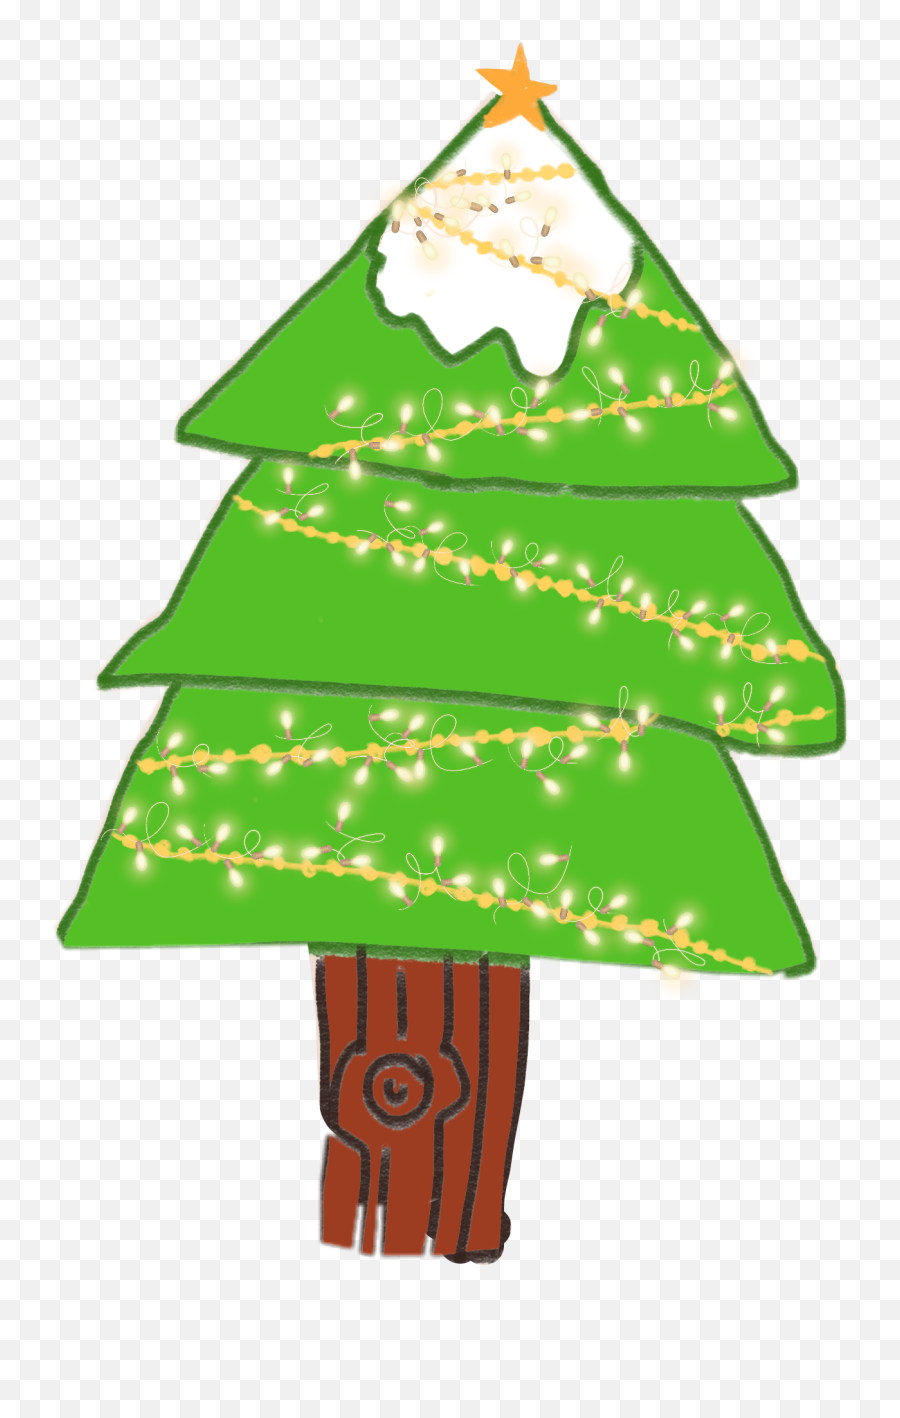 Discover Trending Christmas Tree Stickers Picsart - Christmas Day Emoji,Chrismas Tree Emoji